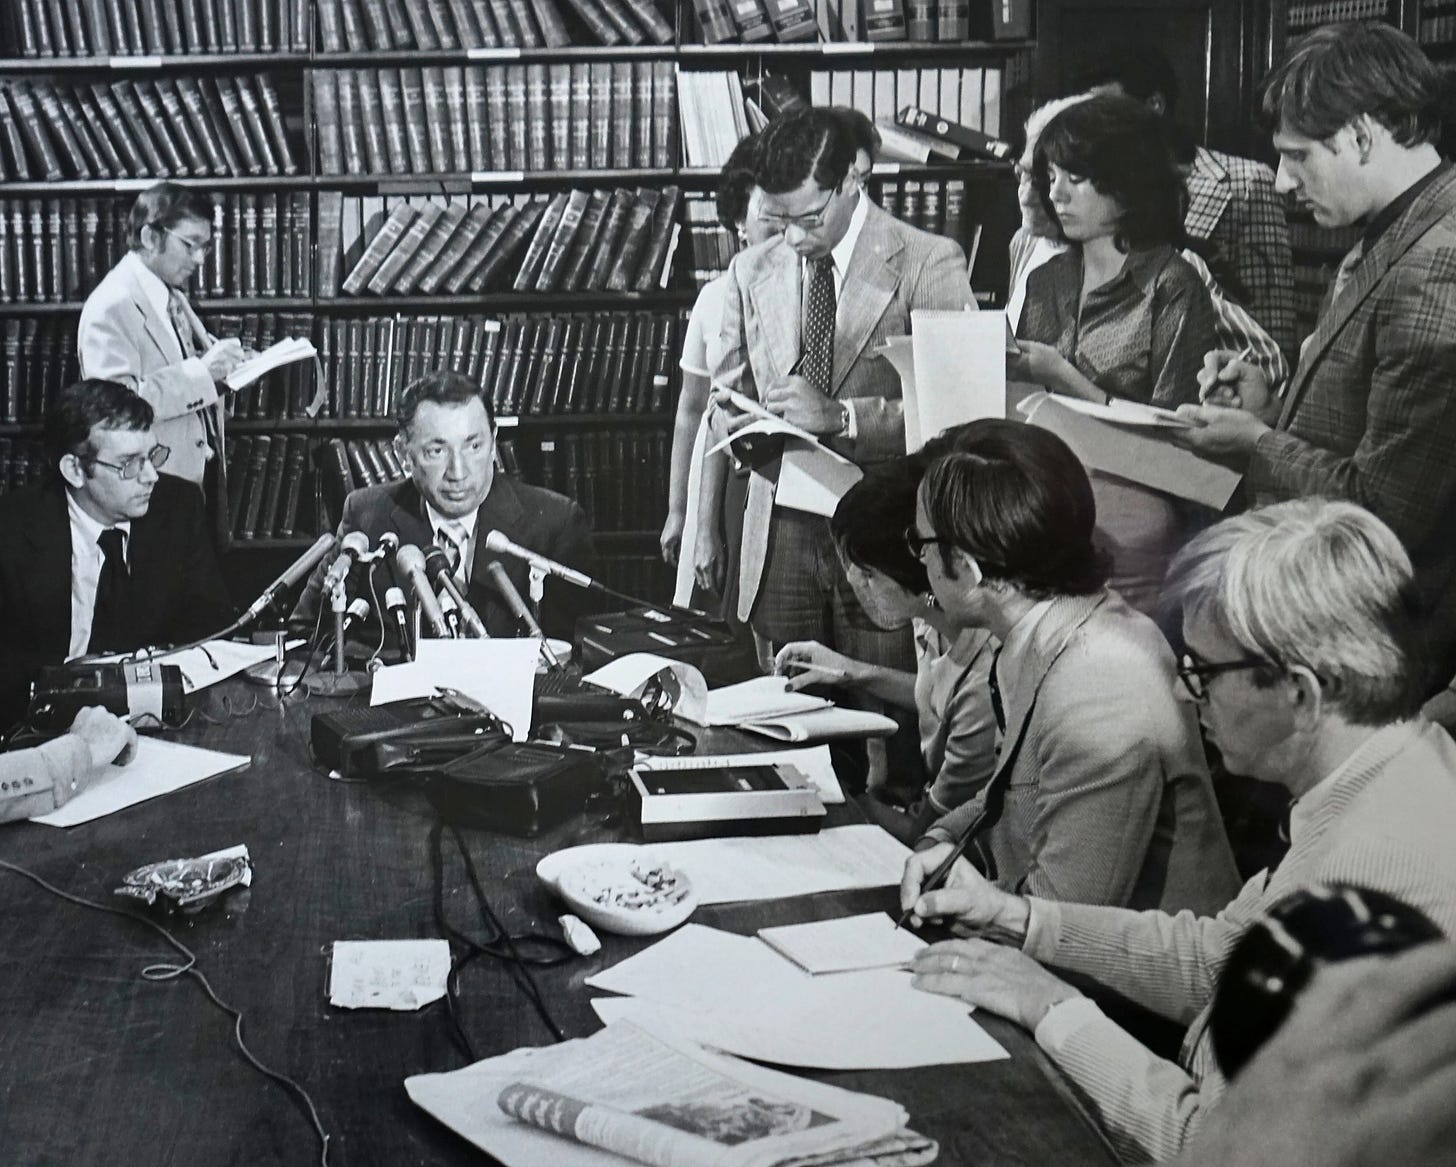 Prosecutor Richard Sprague during a news conference for the Yablonski murders in September 1973.